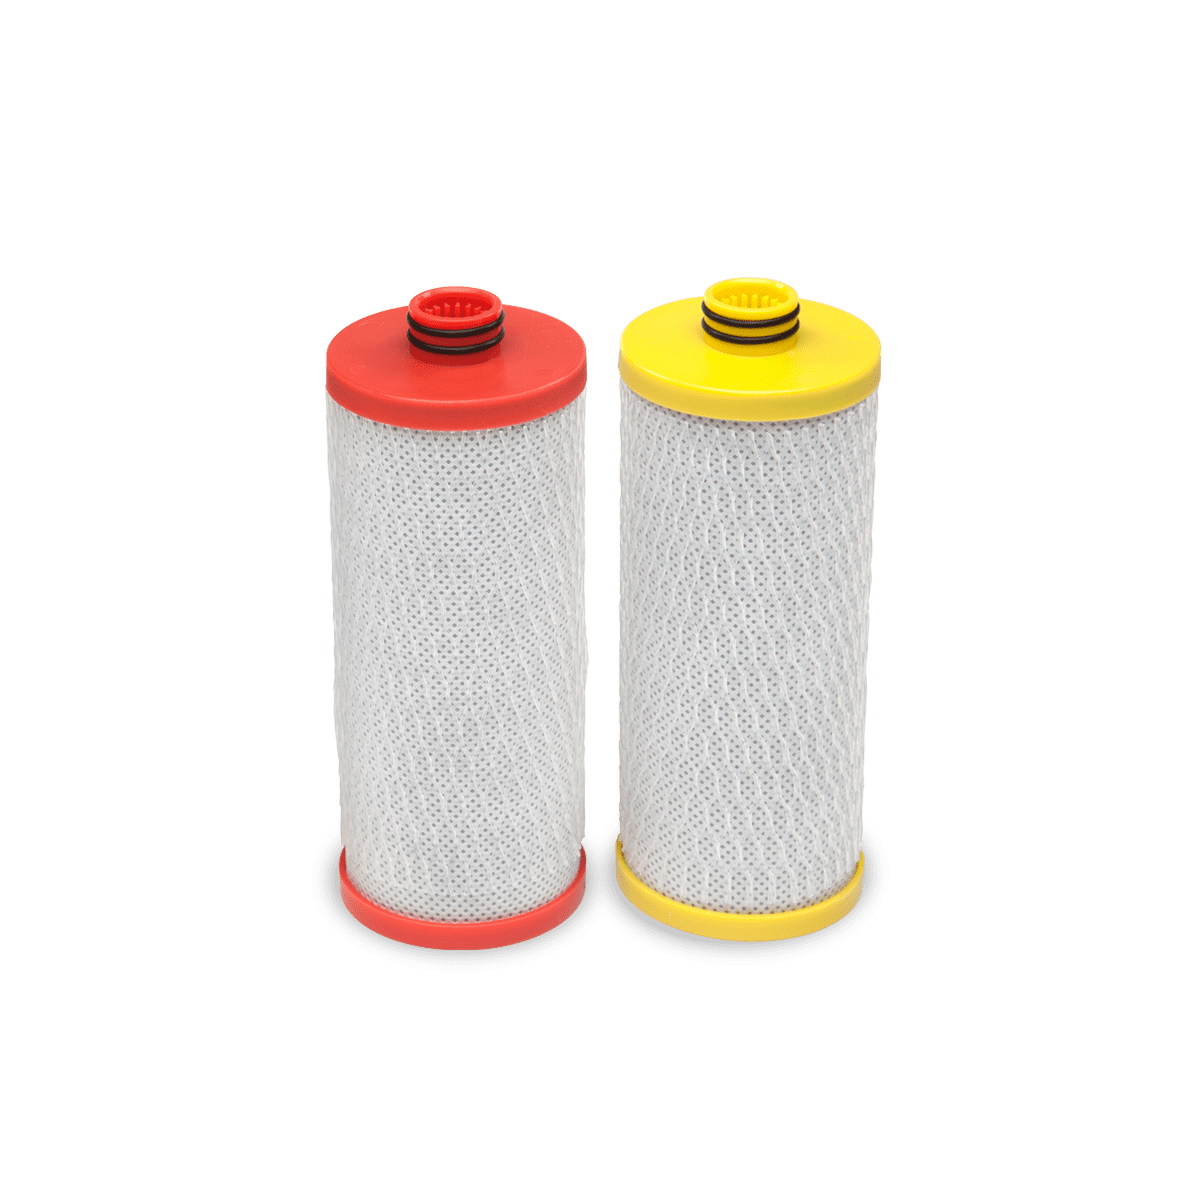 Aquasana AQ-5200R 2-Stage Under Sink Replacement Filter Cartridges for  AQ-5200 Filtration Systems